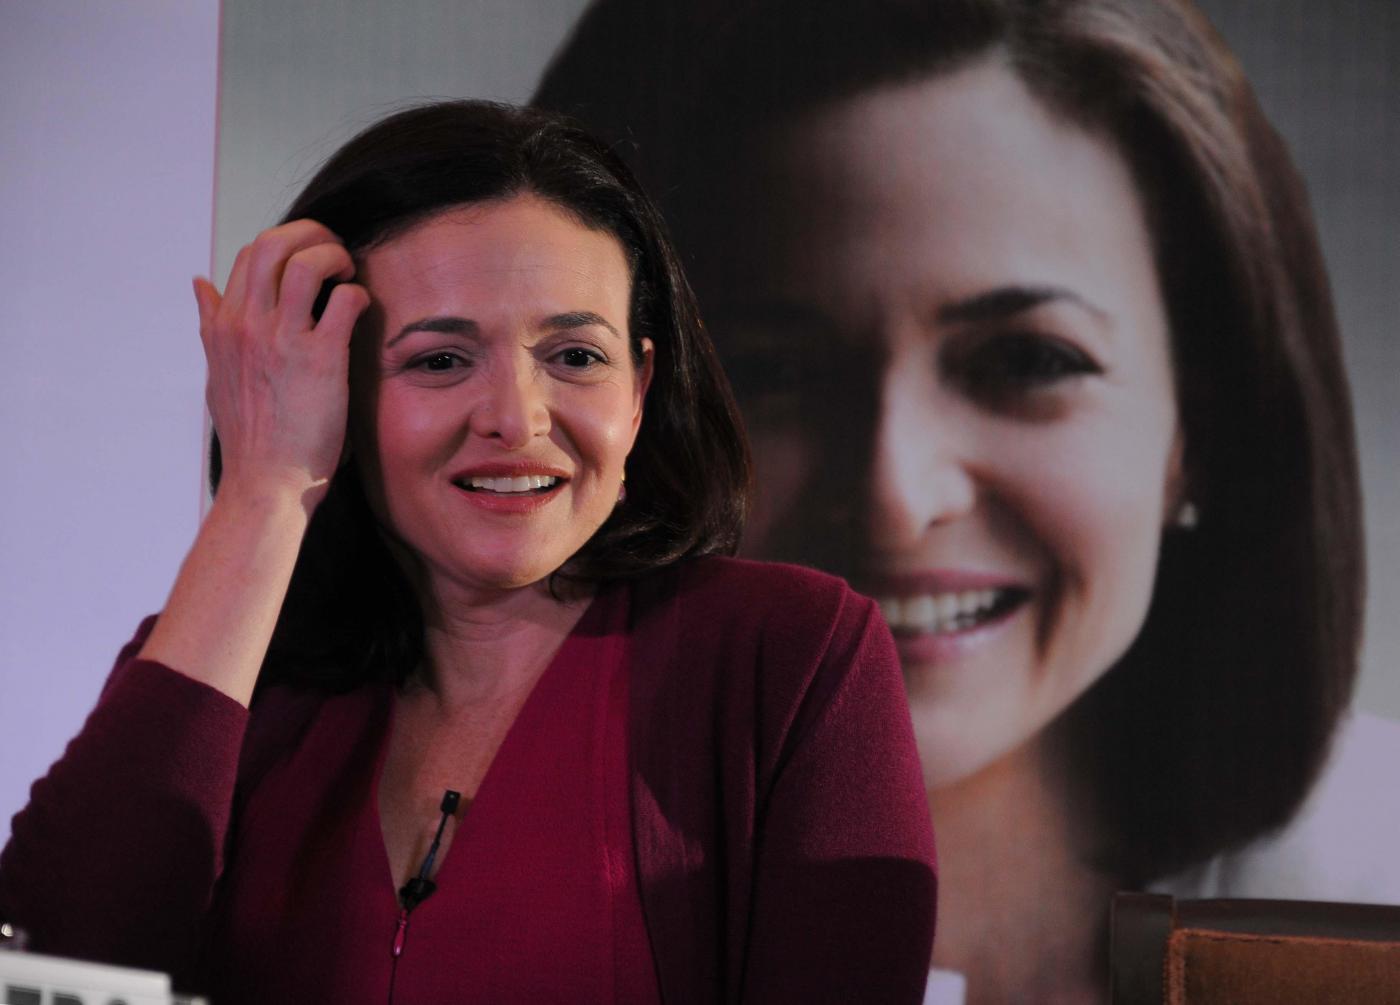 Facebook COO Sheryl Sandberg during a programme in New Delhi on July 2, 2014. (Photo: IANS) by .